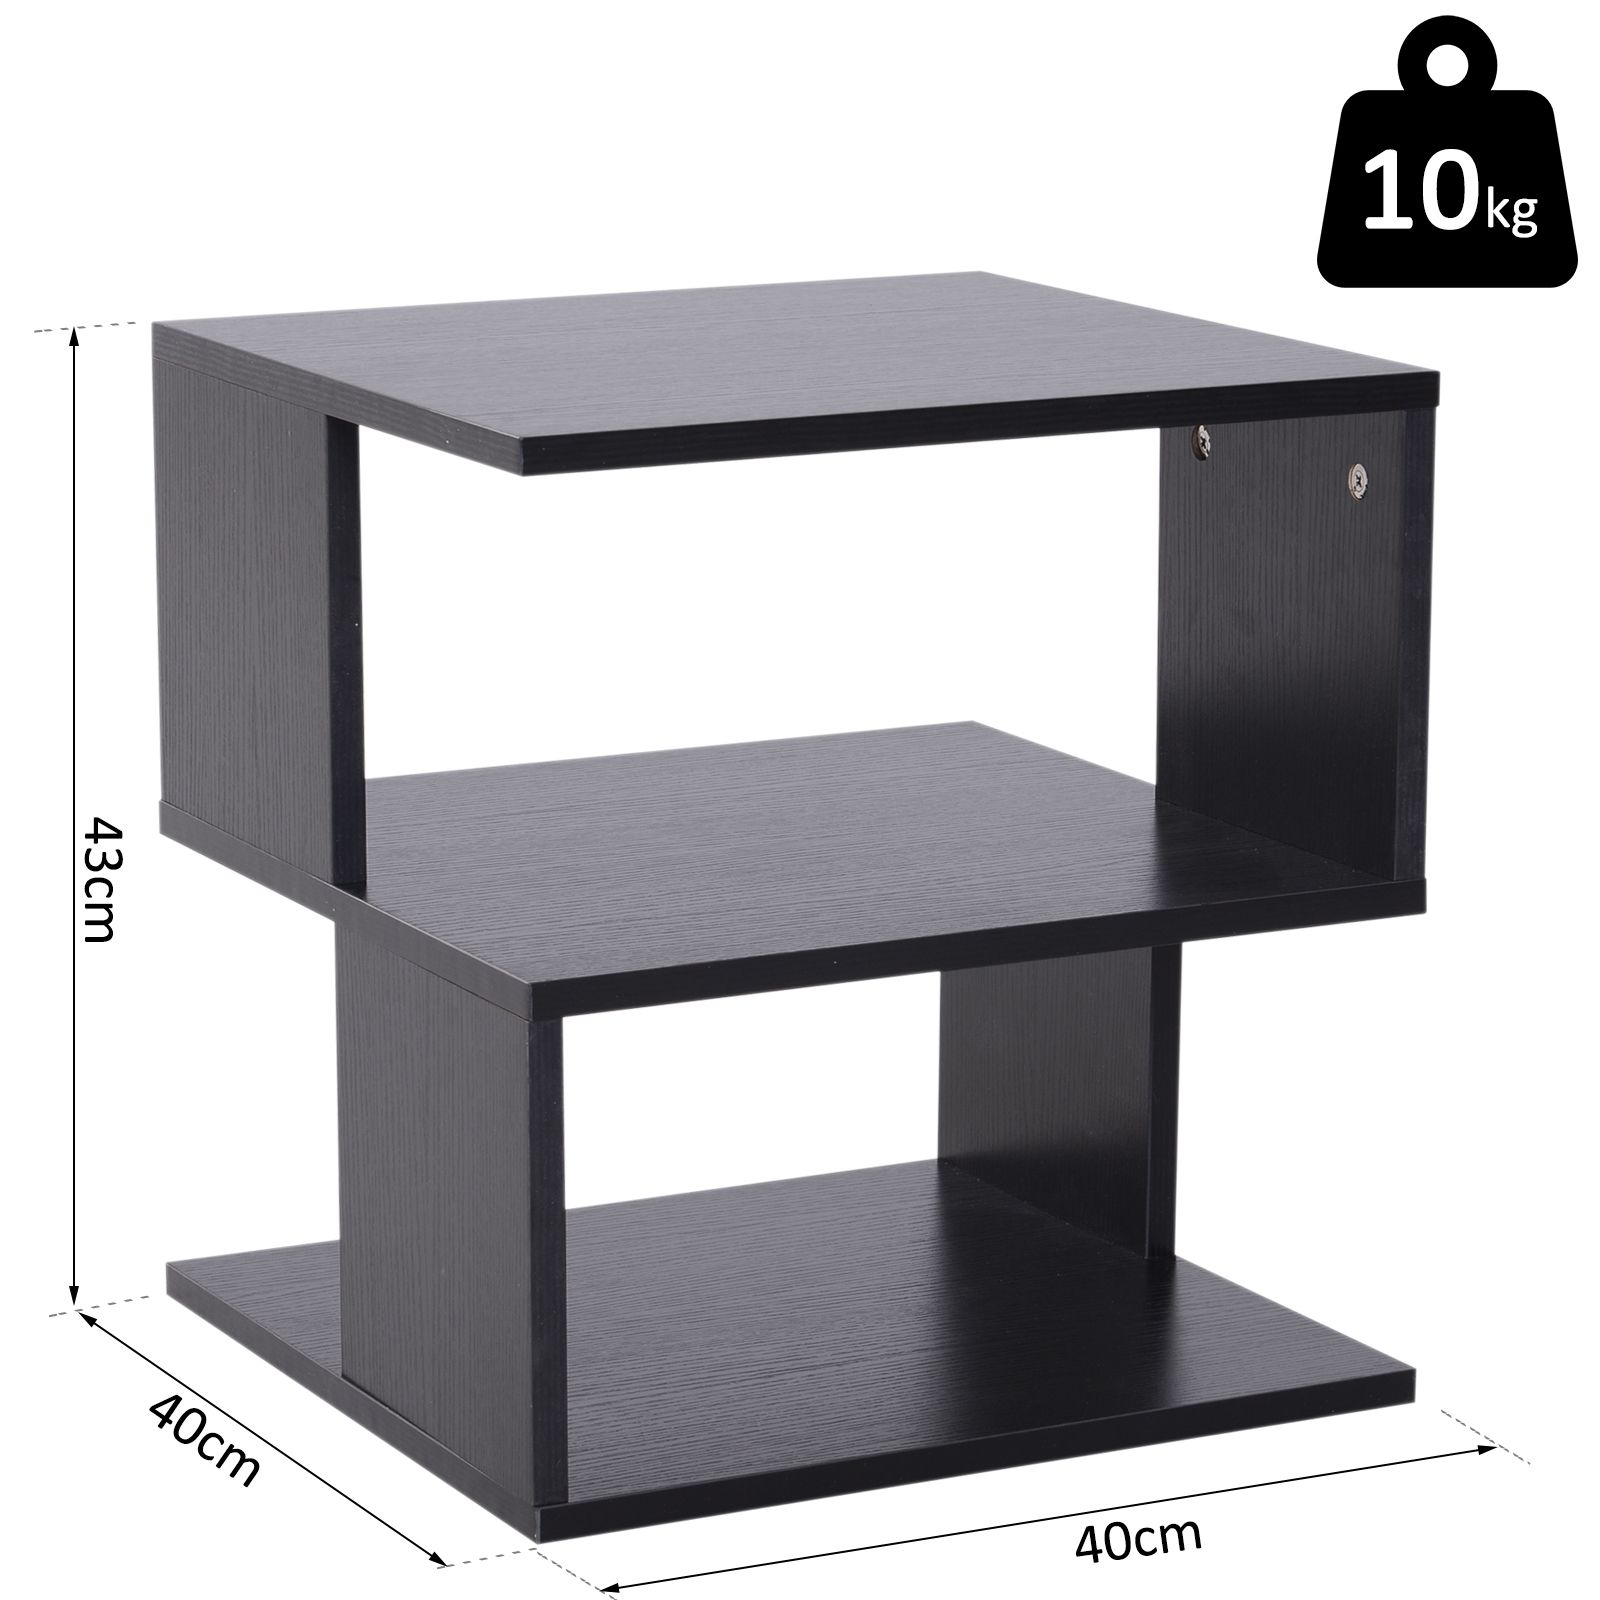 Modern Square 2 Tier Wood Coffee Side Table Storage Shelf Rack Living Pertaining To Wood Coffee Tables With 2 Tier Storage (View 5 of 20)